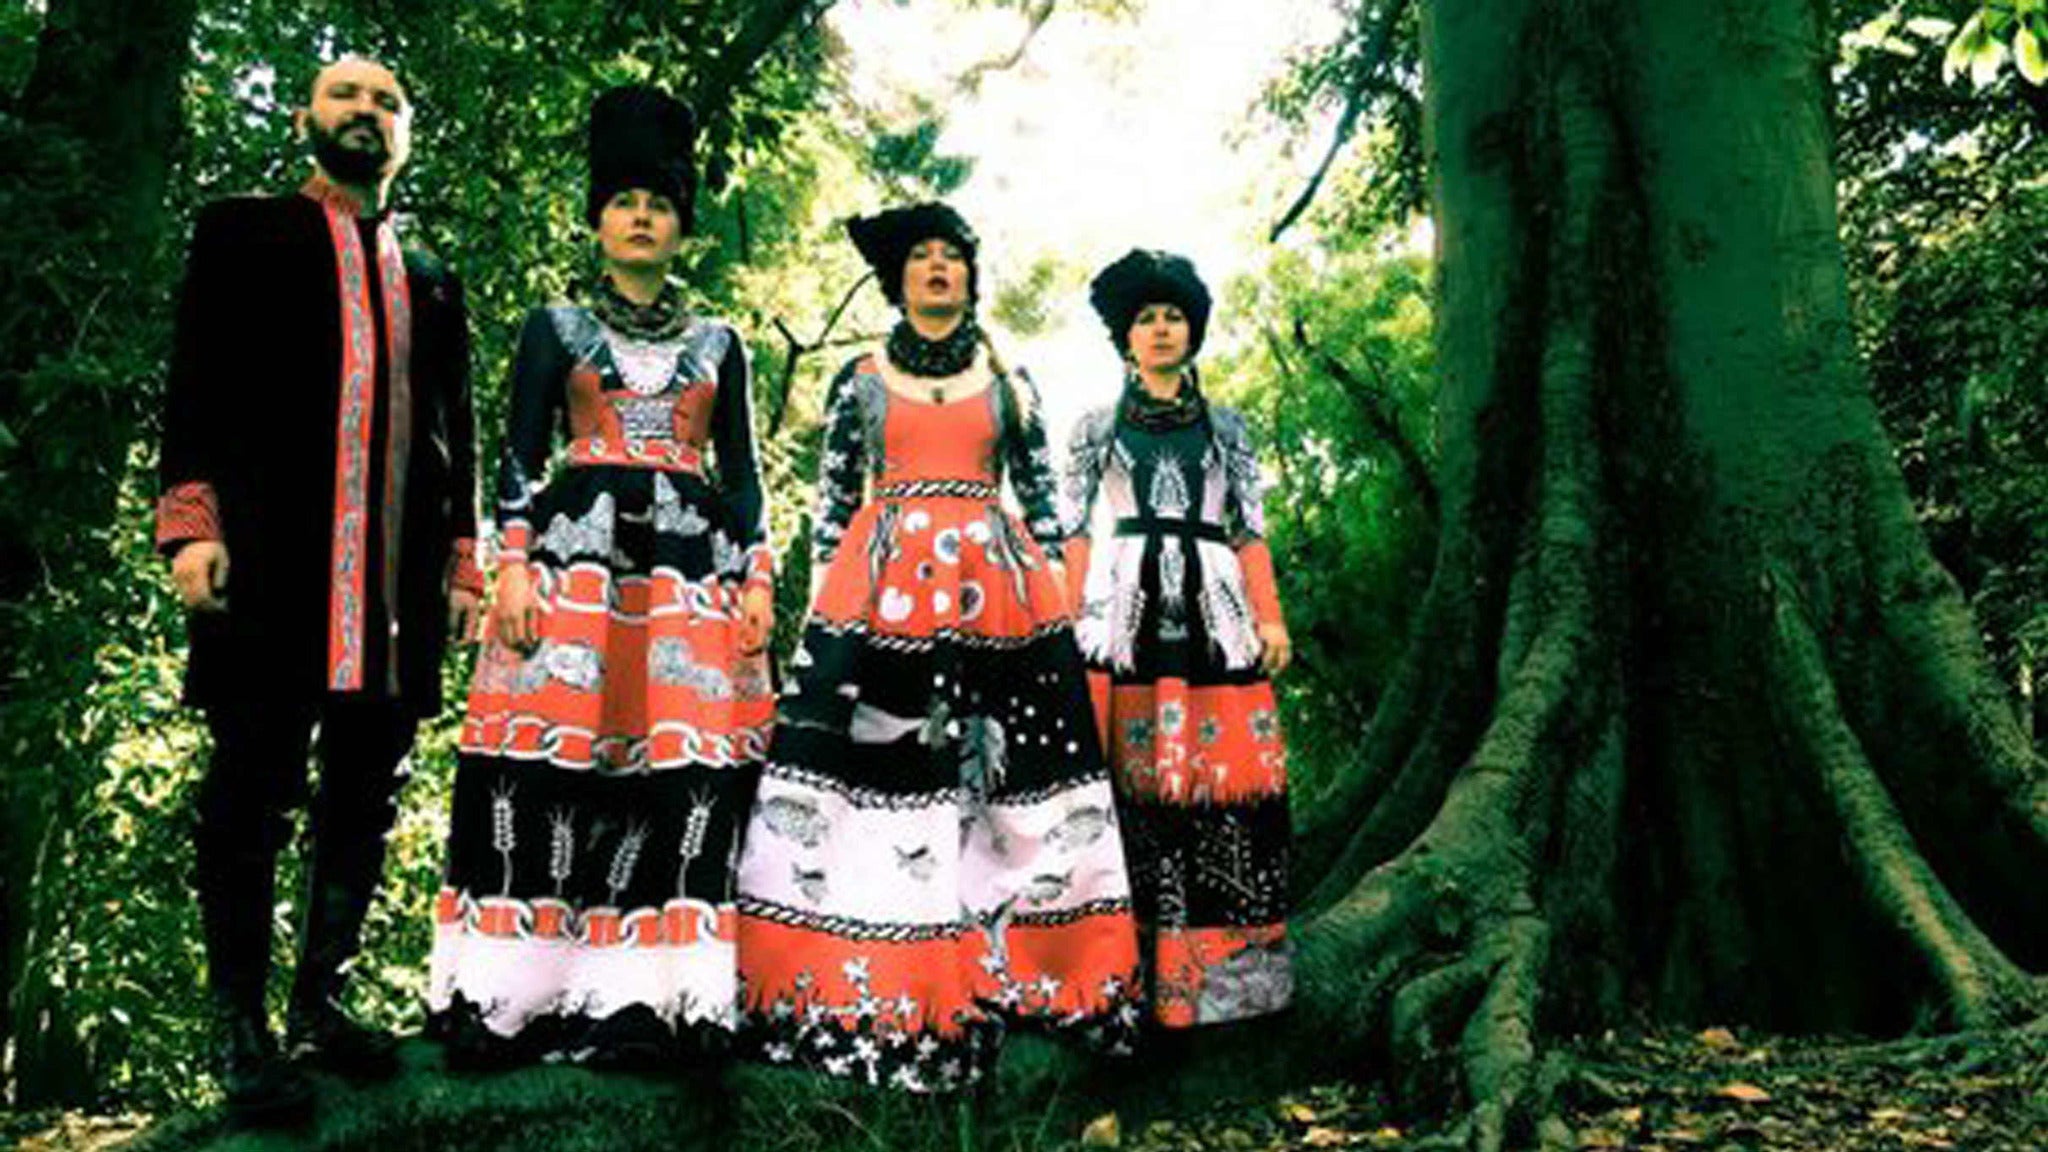 Image used with permission from Ticketmaster | DakhaBrakha tickets